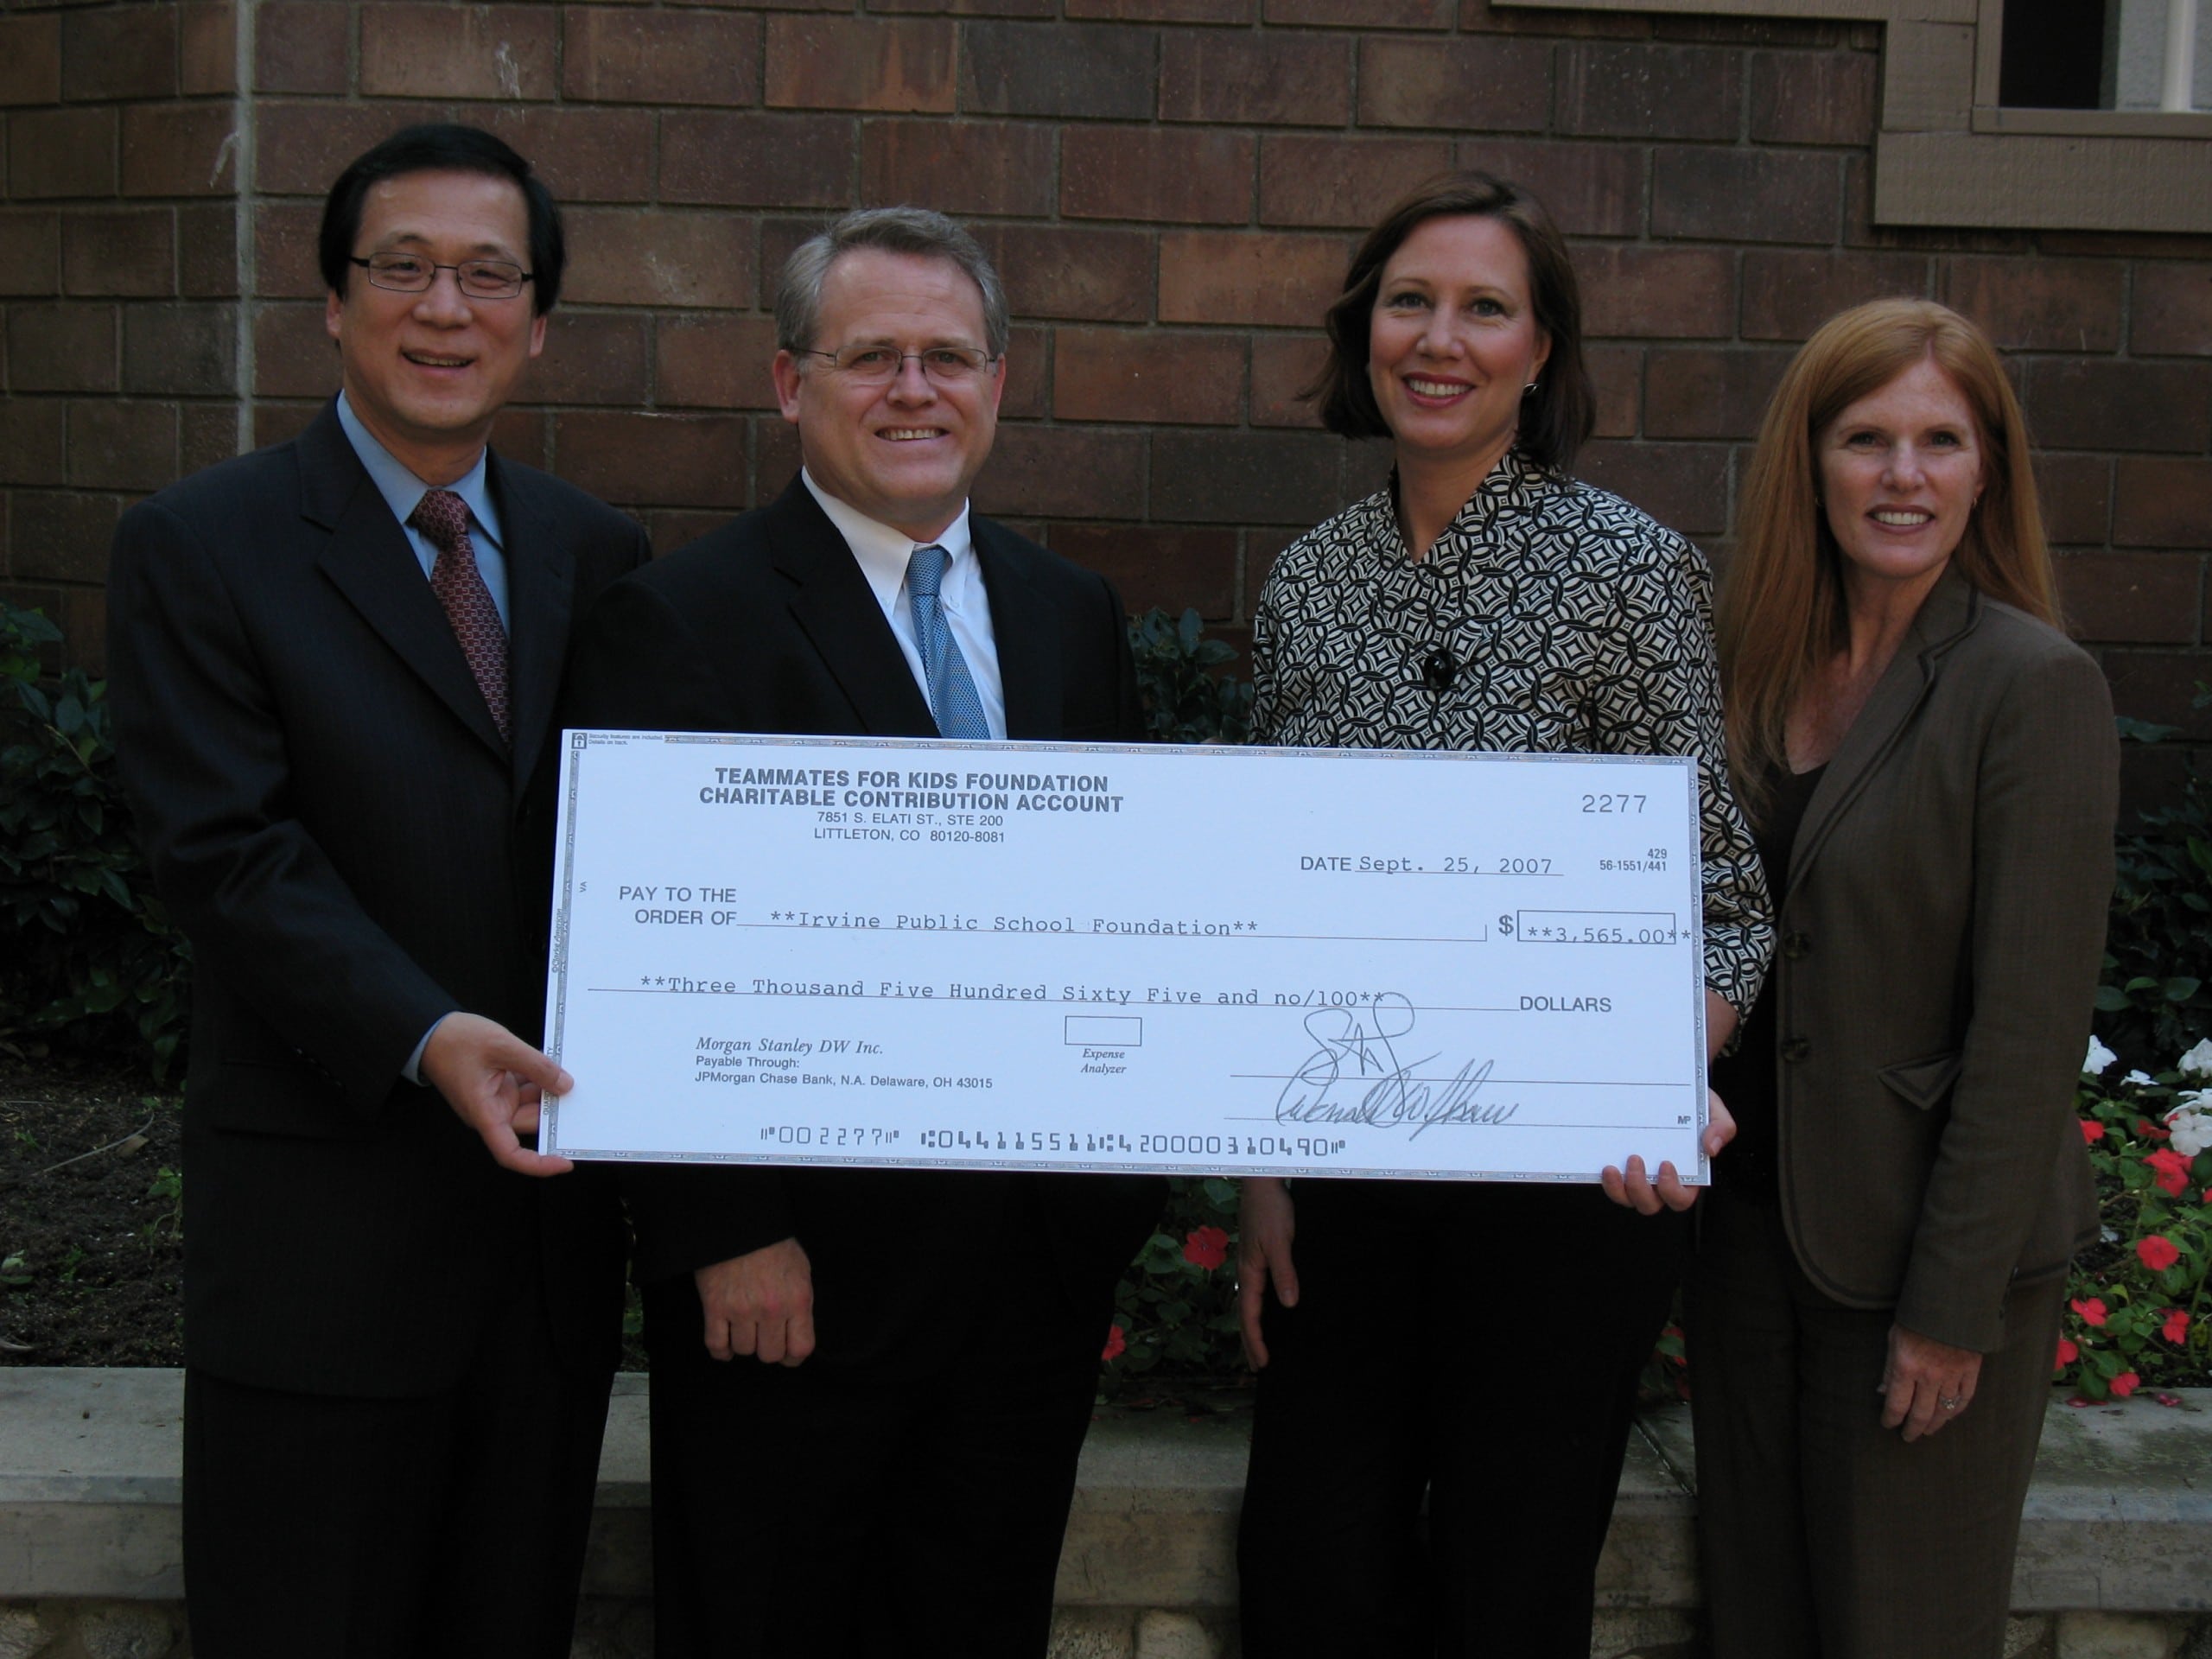 An oversized check from Rice Dentistry to the Irvine Public School Foundation